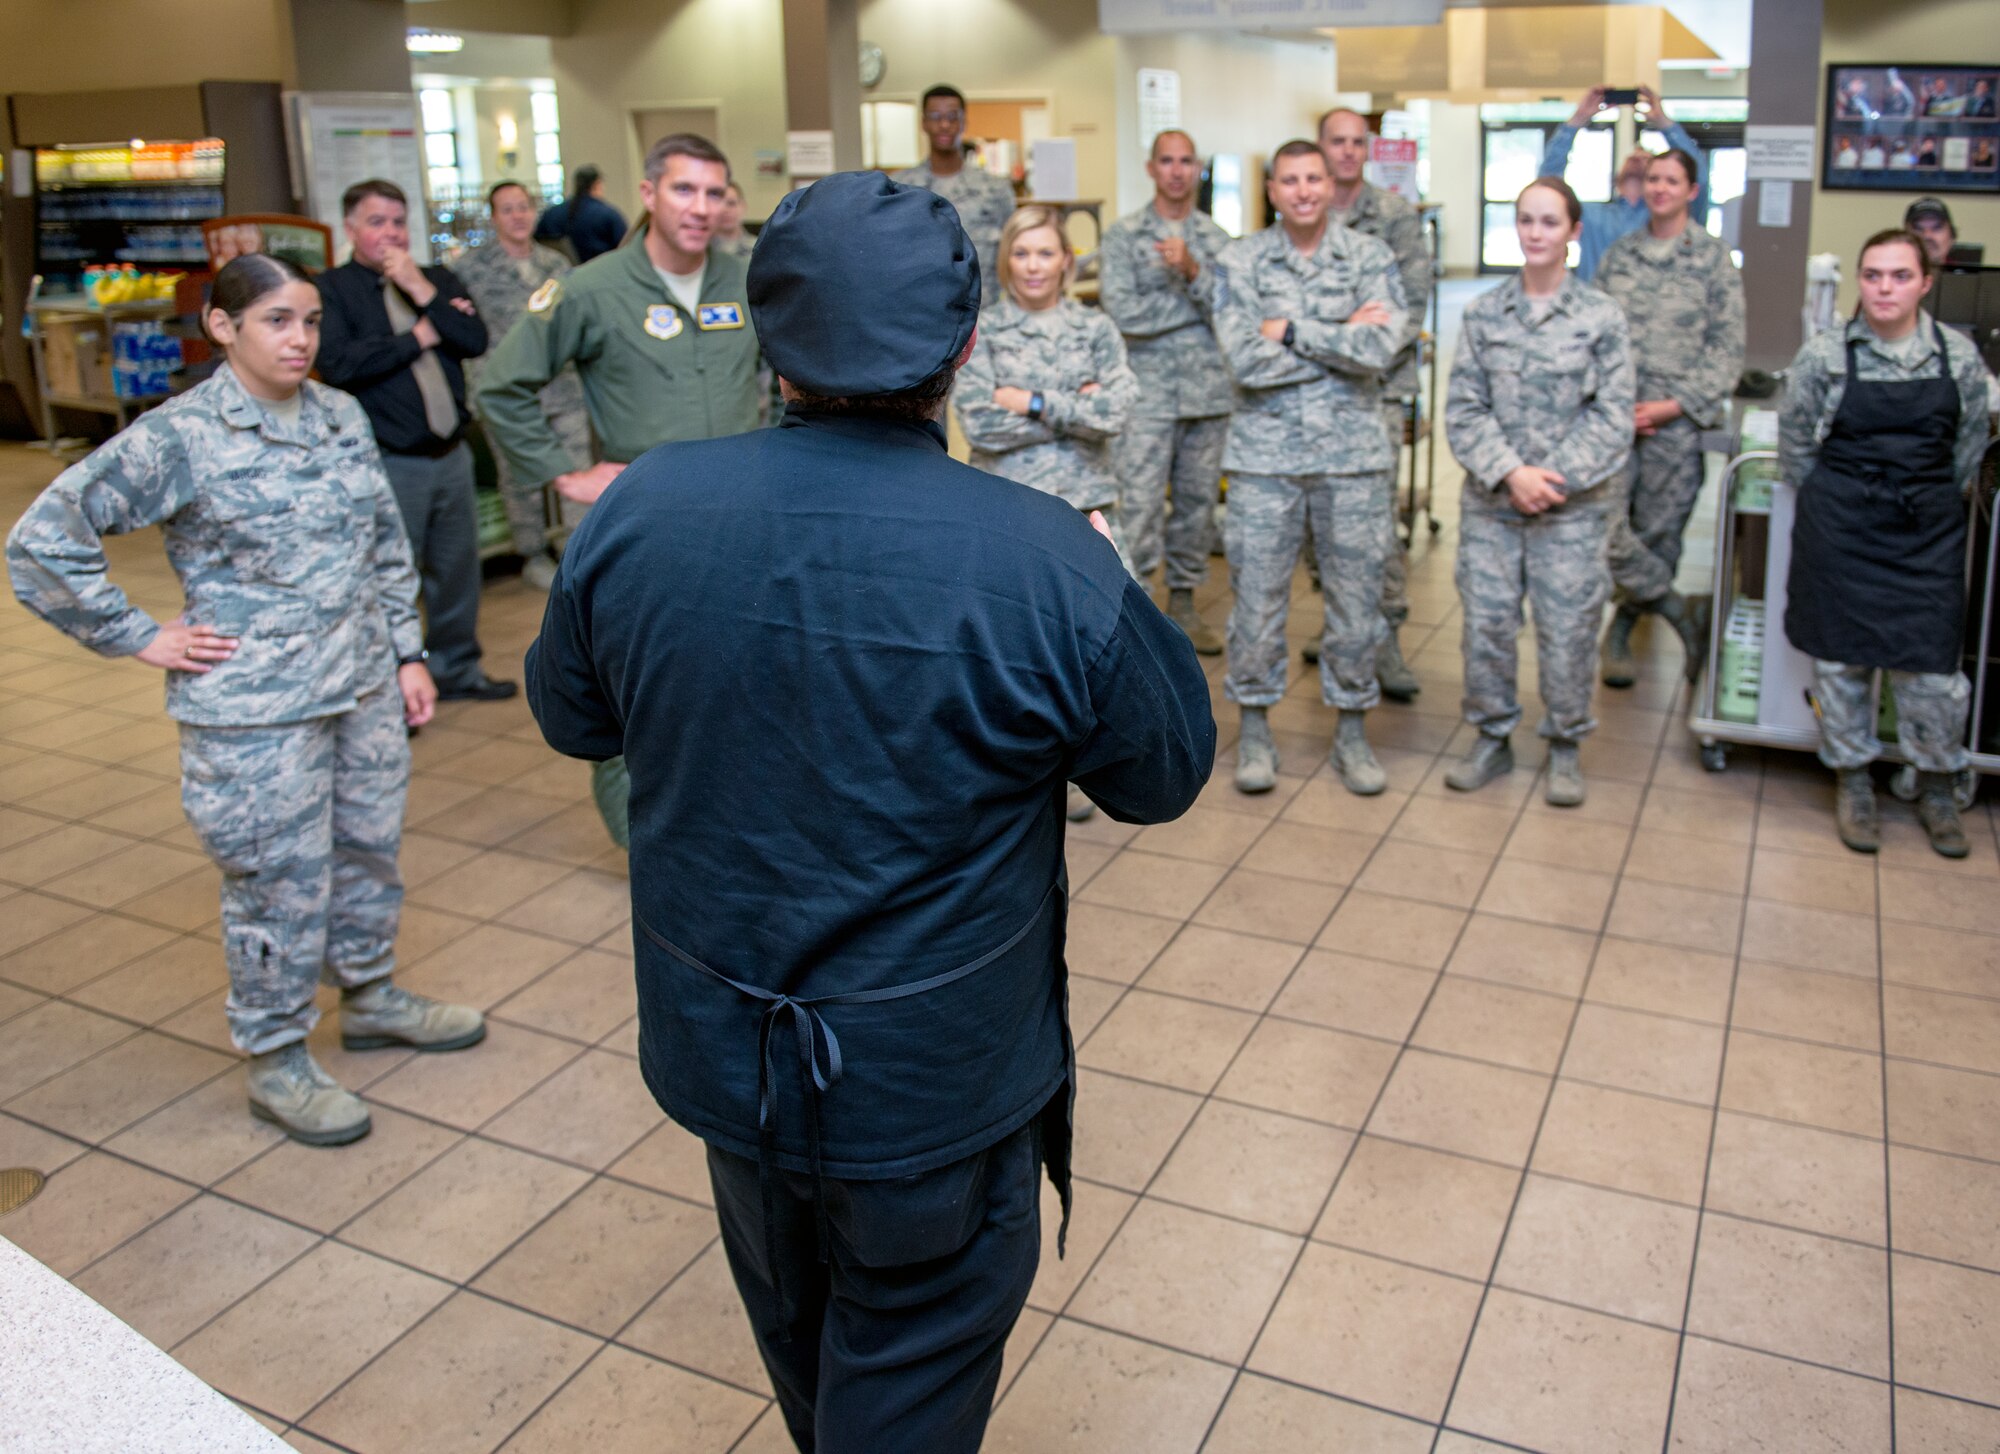 Maynard Oestreich, executive chef for Aramark explains his dish to the 60th Air Mobility Wing commanders and chiefs during the BIBIM Box tasting featuring Korean food at Sierra Inn Dining Facility, Travis Air Force Base, Calif., June 29, 2017. Oestreich a former U.S. Navy veteran and an award-winning chef from Napa Valley, Calif., took the head chef position so he could mentor young Airmen. (U.S. Air Force photo by Louis Briscese)